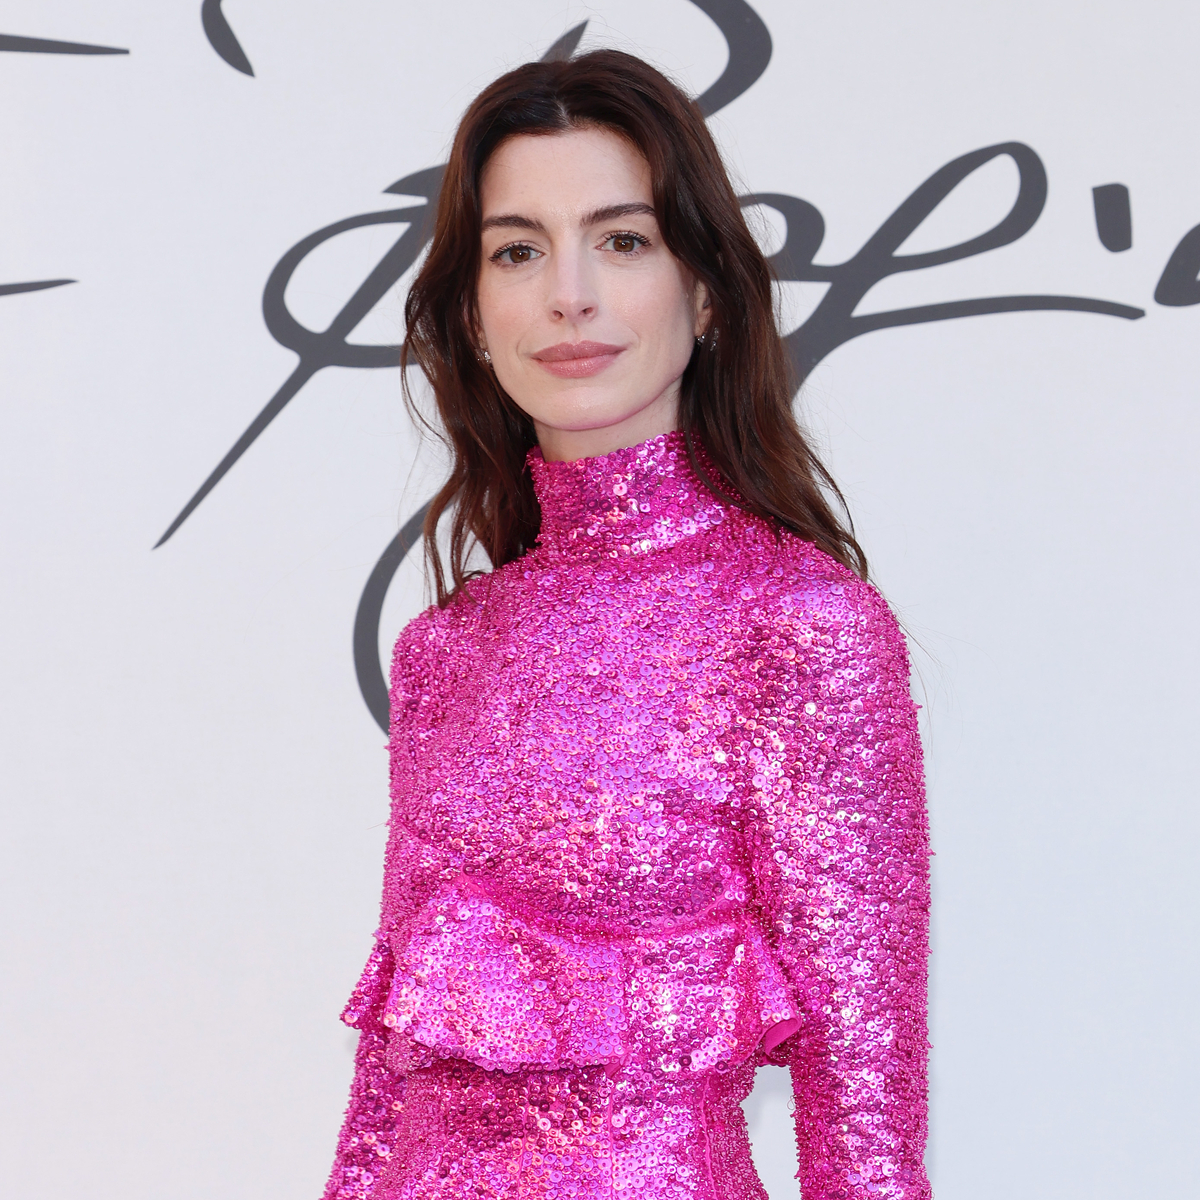 Anne Hathaway Shares She Suffered Miscarriage Before Welcoming Sons